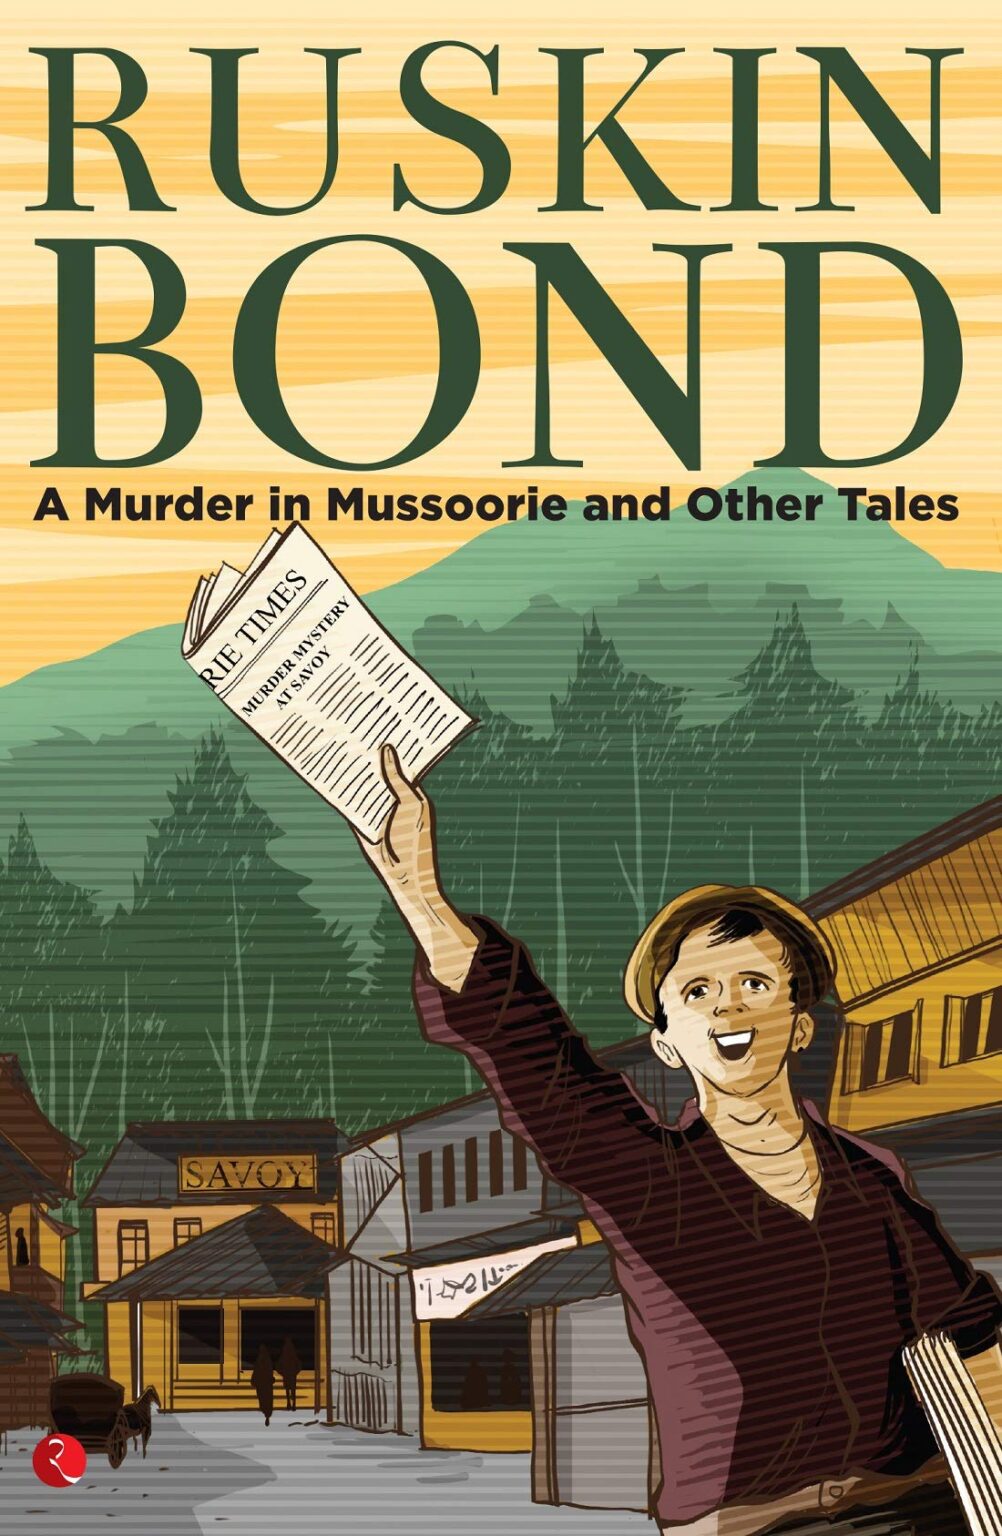 a book review of ruskin bond